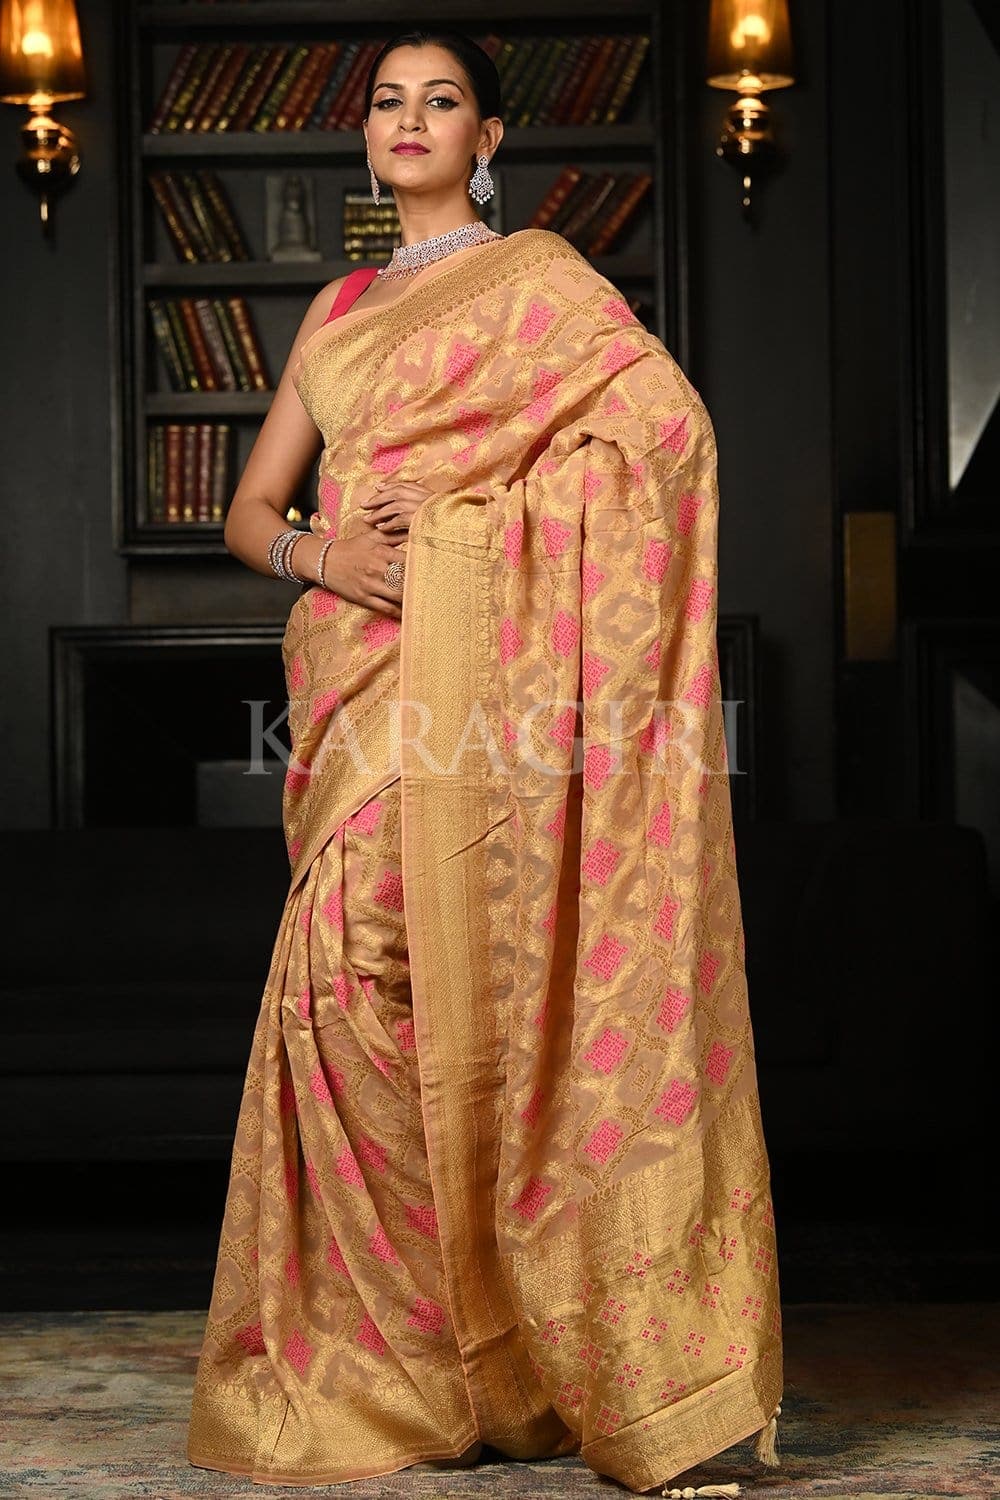 The Handlooms - Pure Chiffon Khaddi Banarasi Saree for just ₹6999.00. Order  here https://thehandlooms.com/products/pure-chiffon-khaddi-banarasi-saree-210  Download our Mobile📱App and shop on the go! 👉Store location -  https://maps.app.goo.gl ...